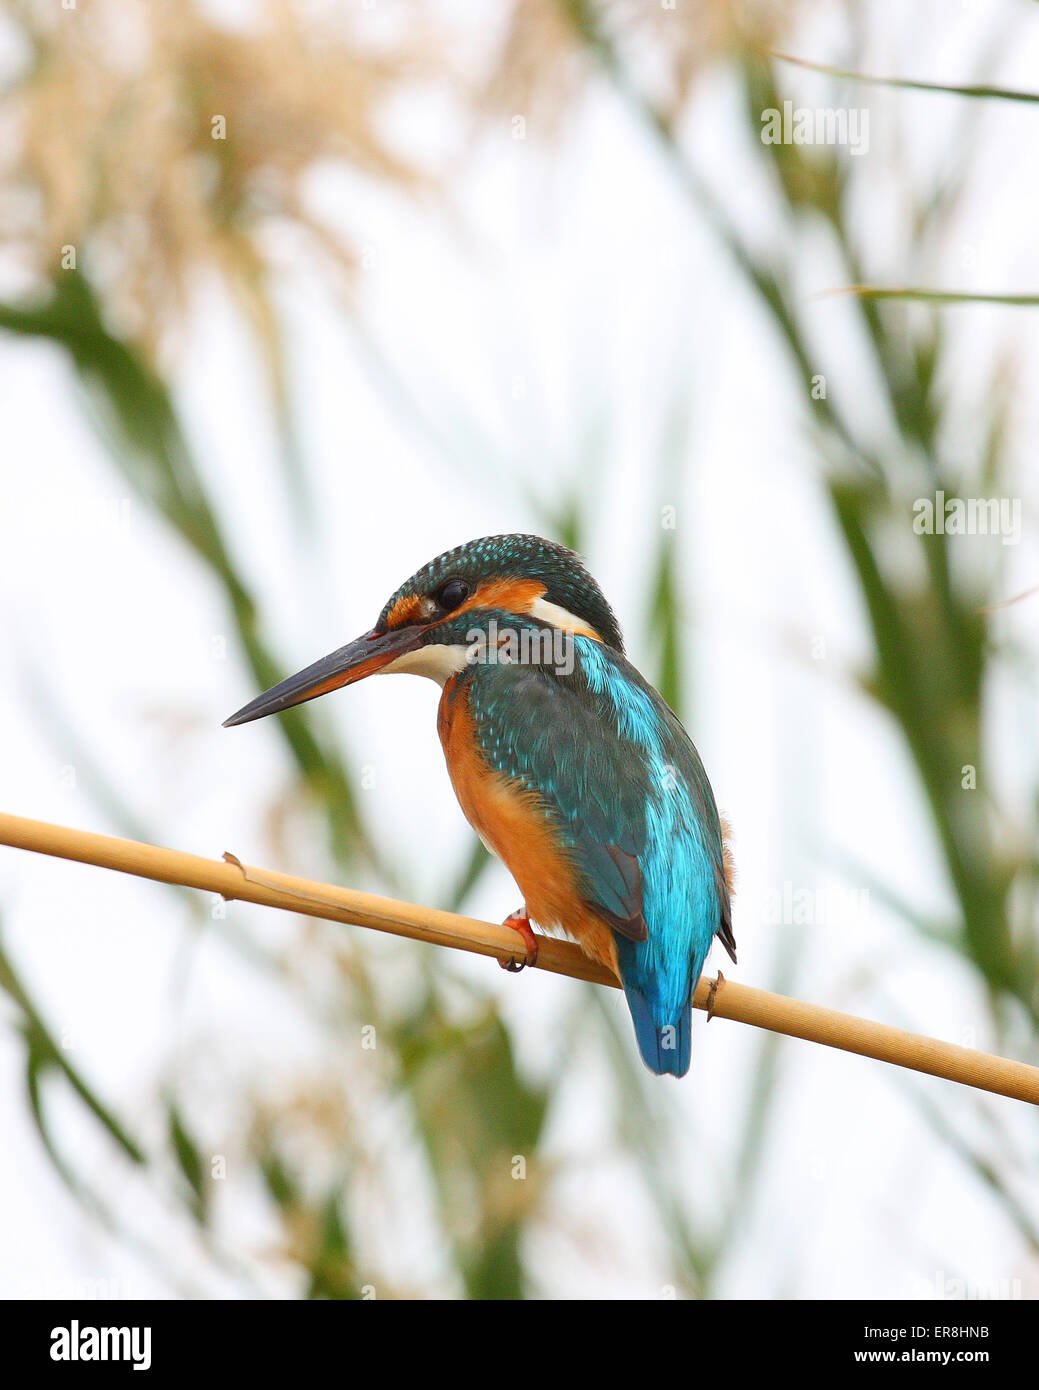 King fisher portrait on tree branch Stock Photo